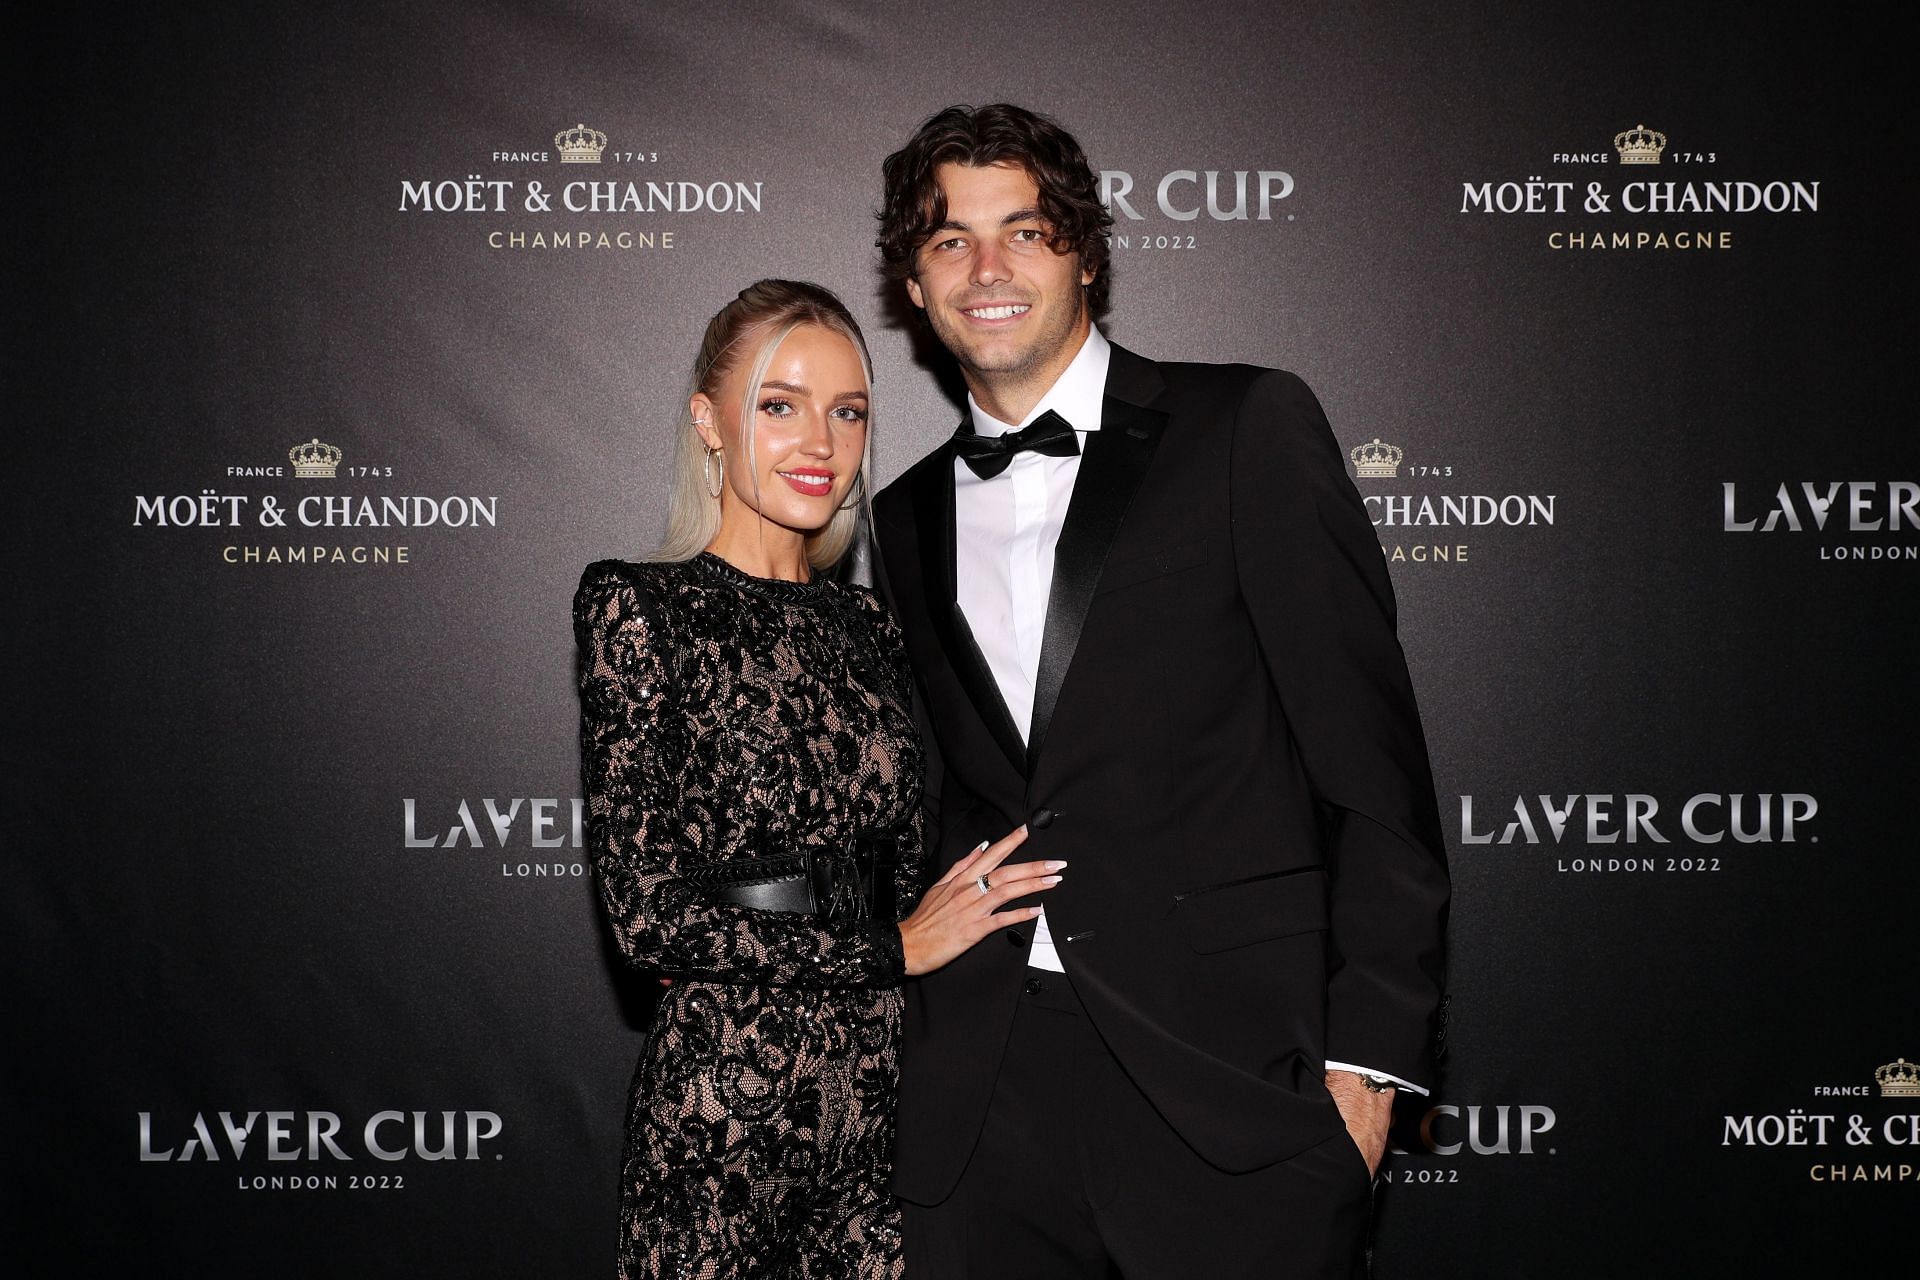 Morgan Riddle and Taylor Fritz at the 2022 Laver Cup